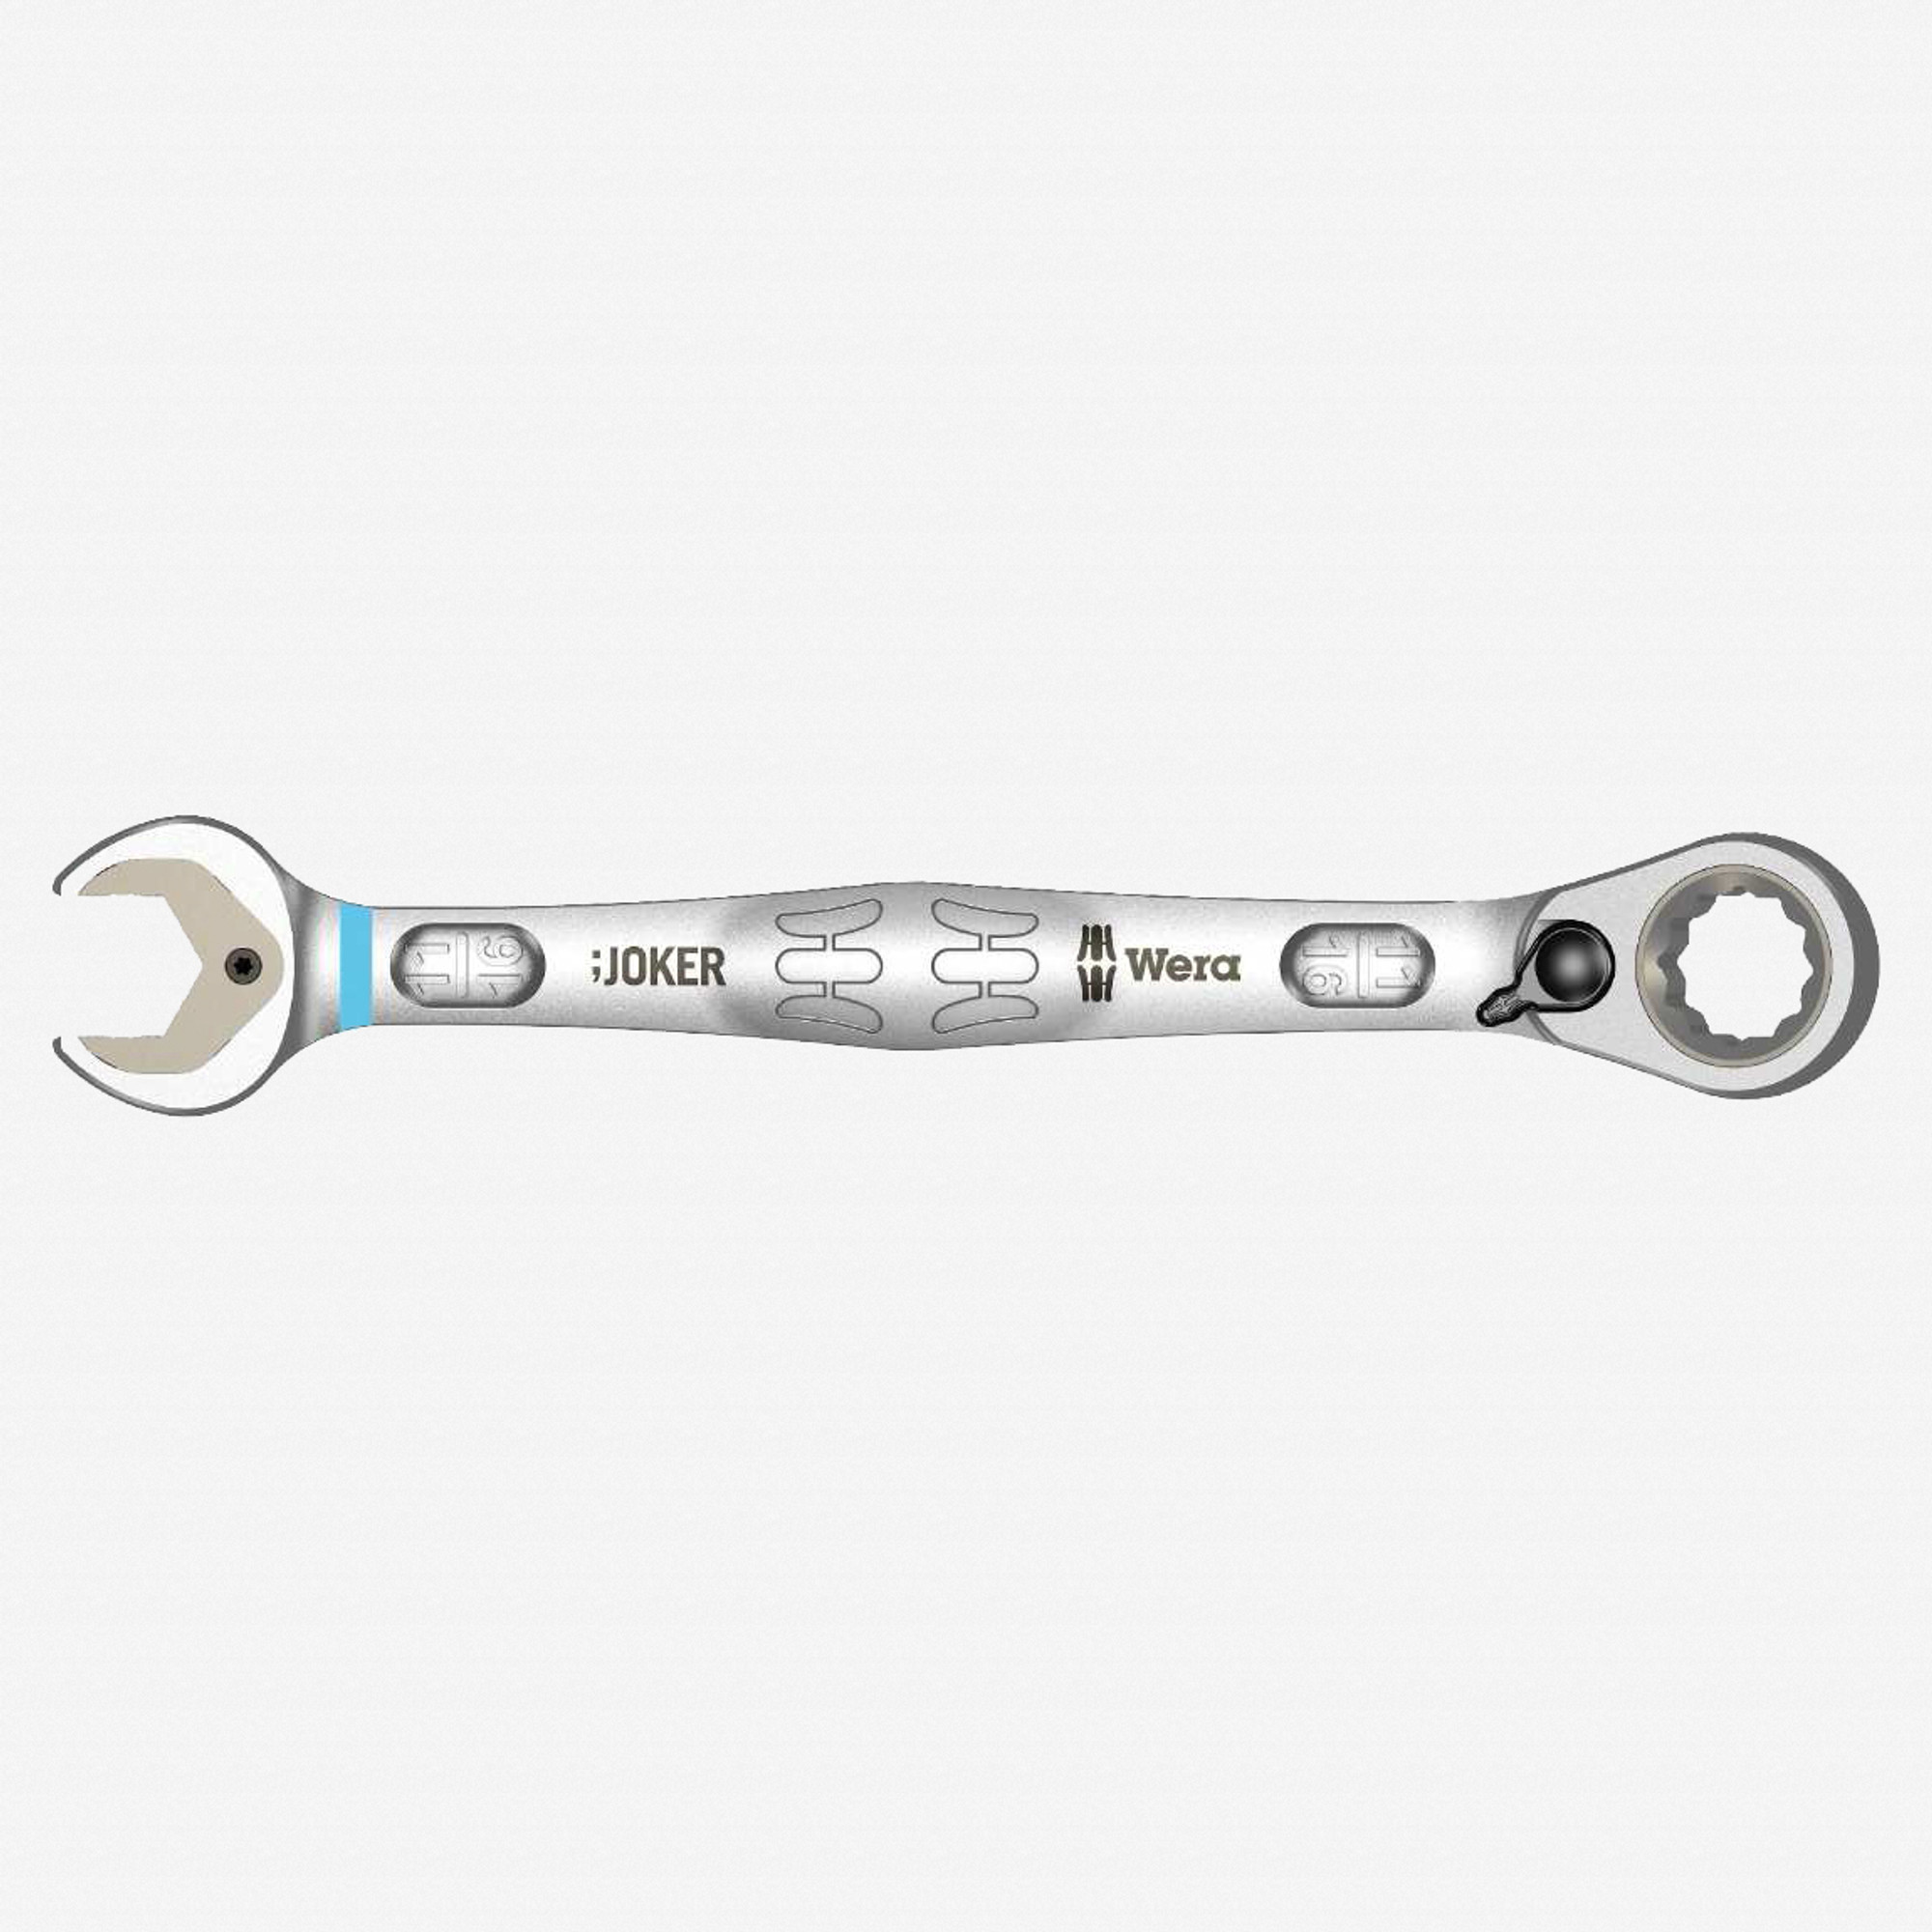 Wera 020081 Joker Combination Wrench with Switch - 11/16